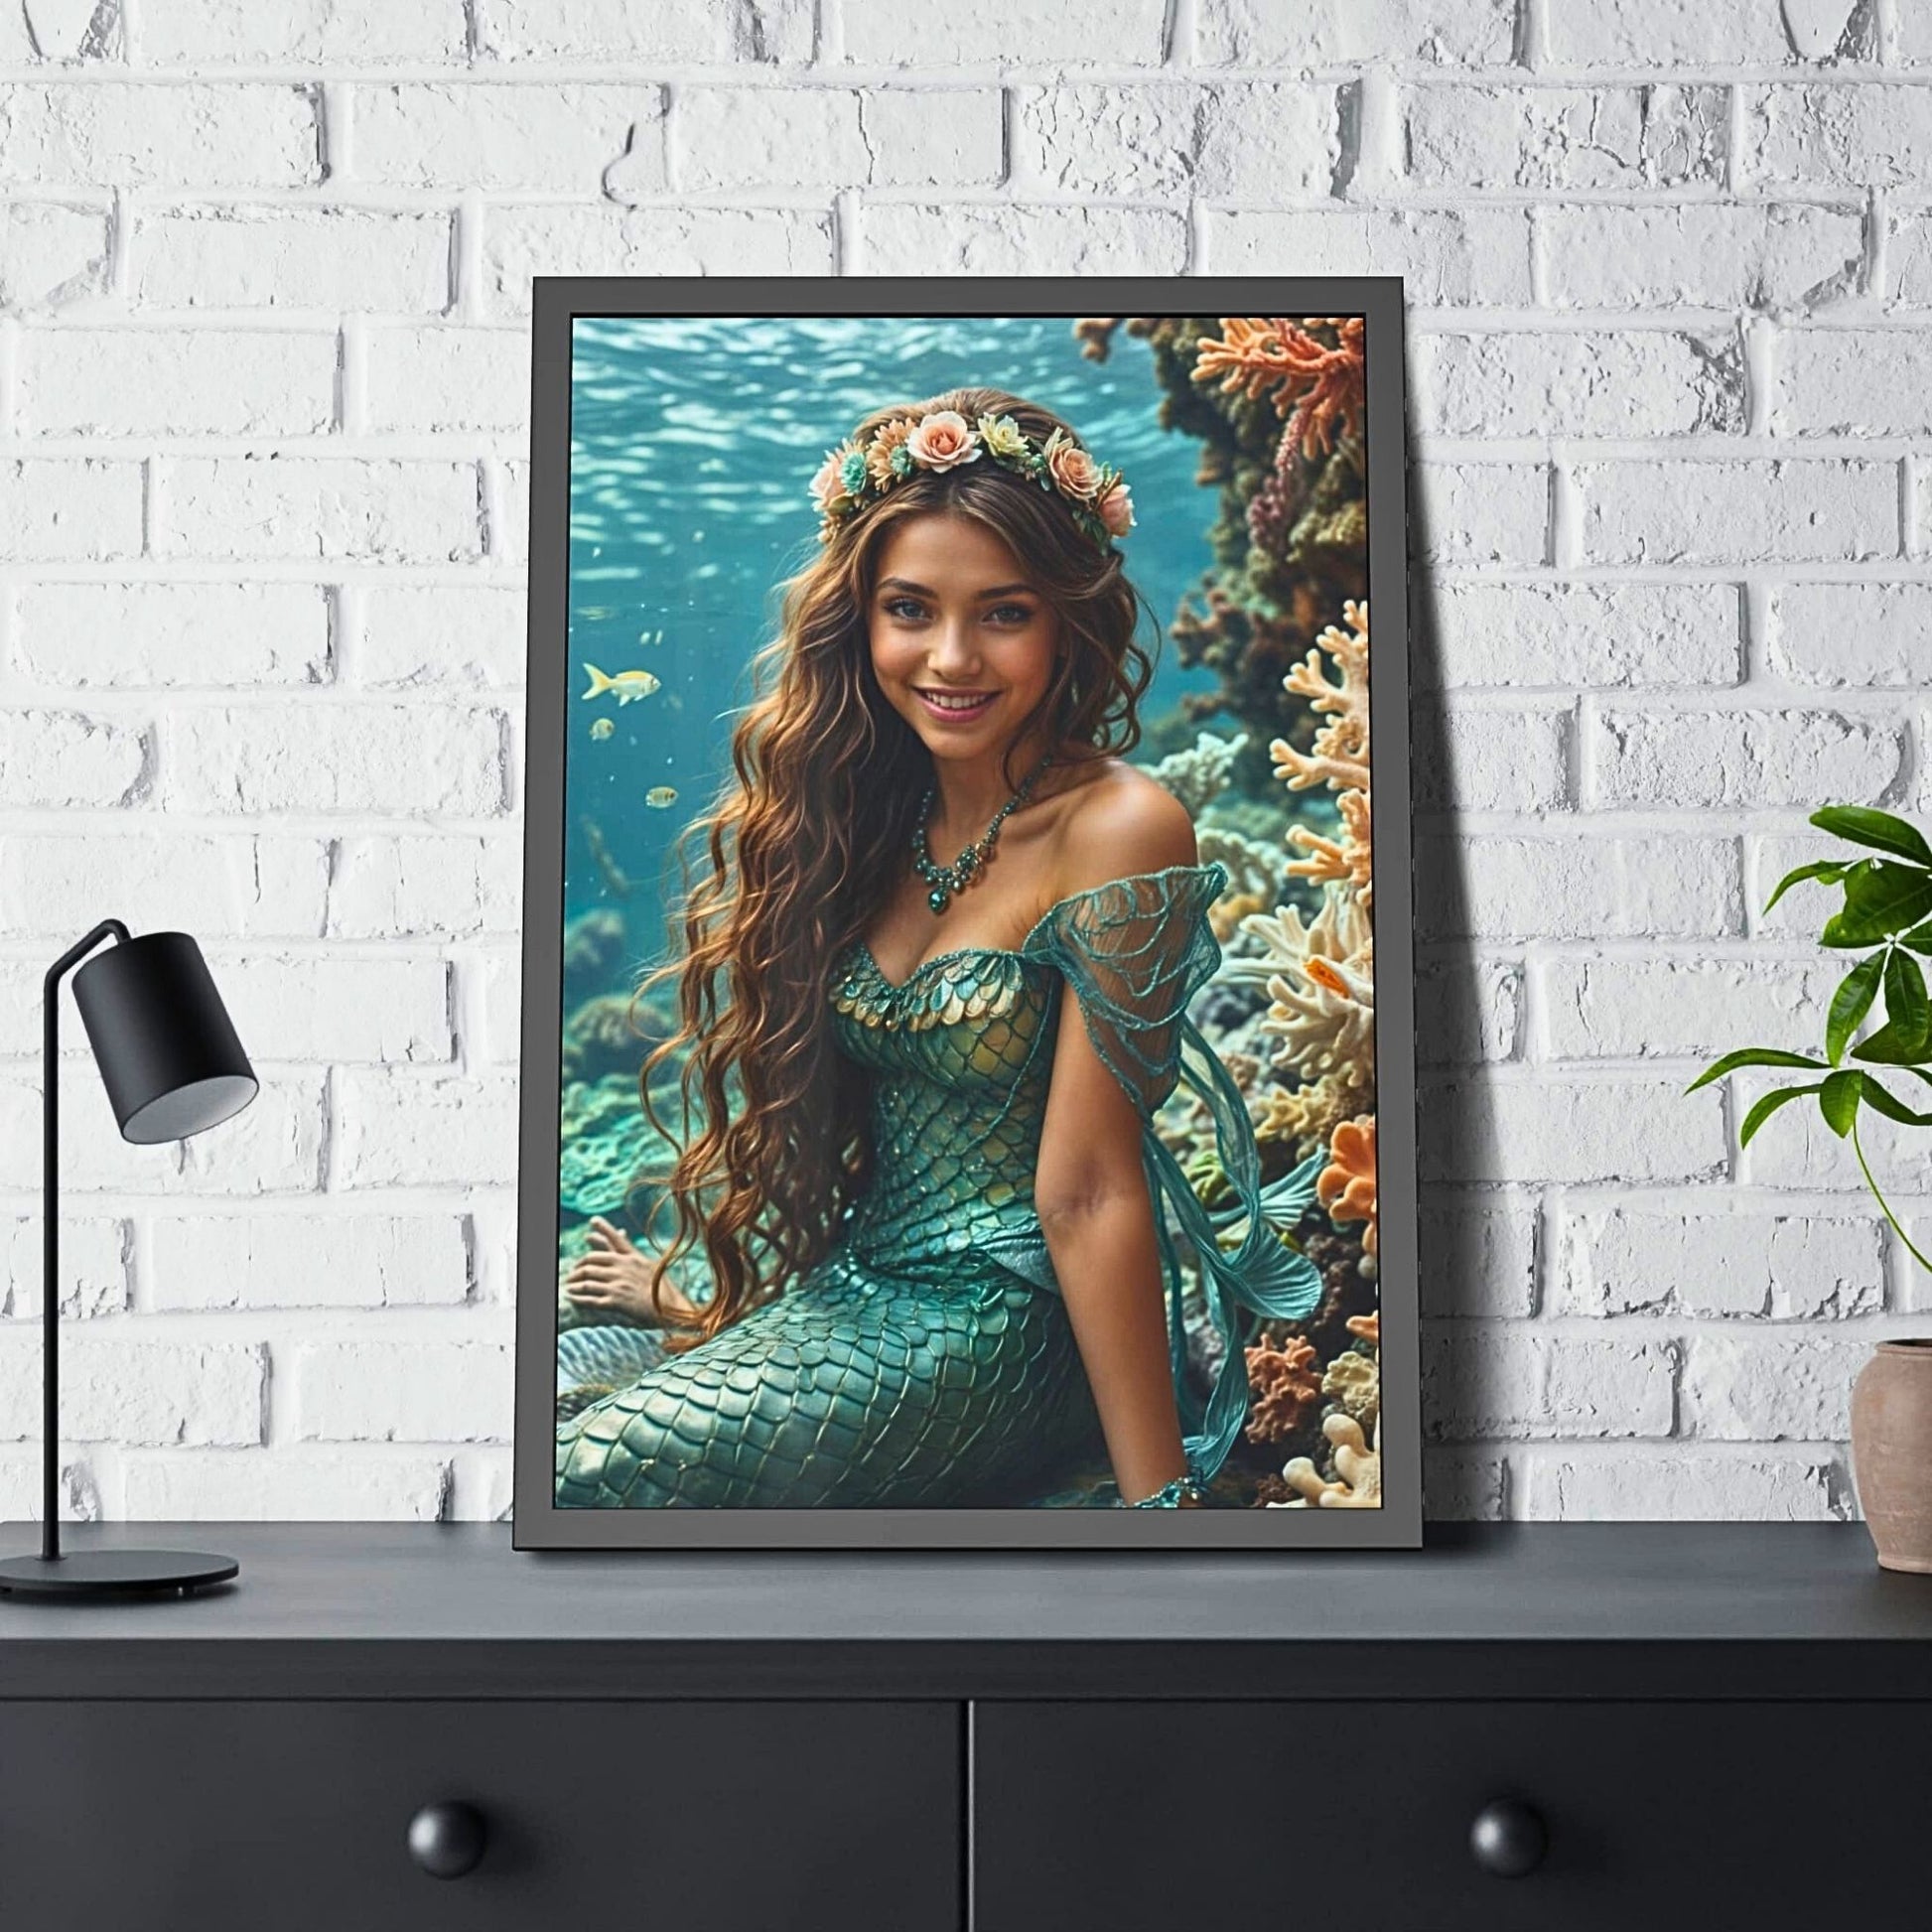 Transform a cherished photo into a captivating Custom Mermaid Portrait, creating a Personalized Princess Mermaid Portrait From Photo. This Fantasy Female Portrait is an exquisite Birthday gift for a woman, perfect for adorning any wall. Whether you're looking for Mermaid Gifts or Princess Birthday Gifts, our Custom Portrait for Girls brings fairy tales to life. Convert any Photo to mermaid portrait or Princess Photo portrait effortlessly. Make your gift unforgettable with a Custom Mermaid Portrait today!